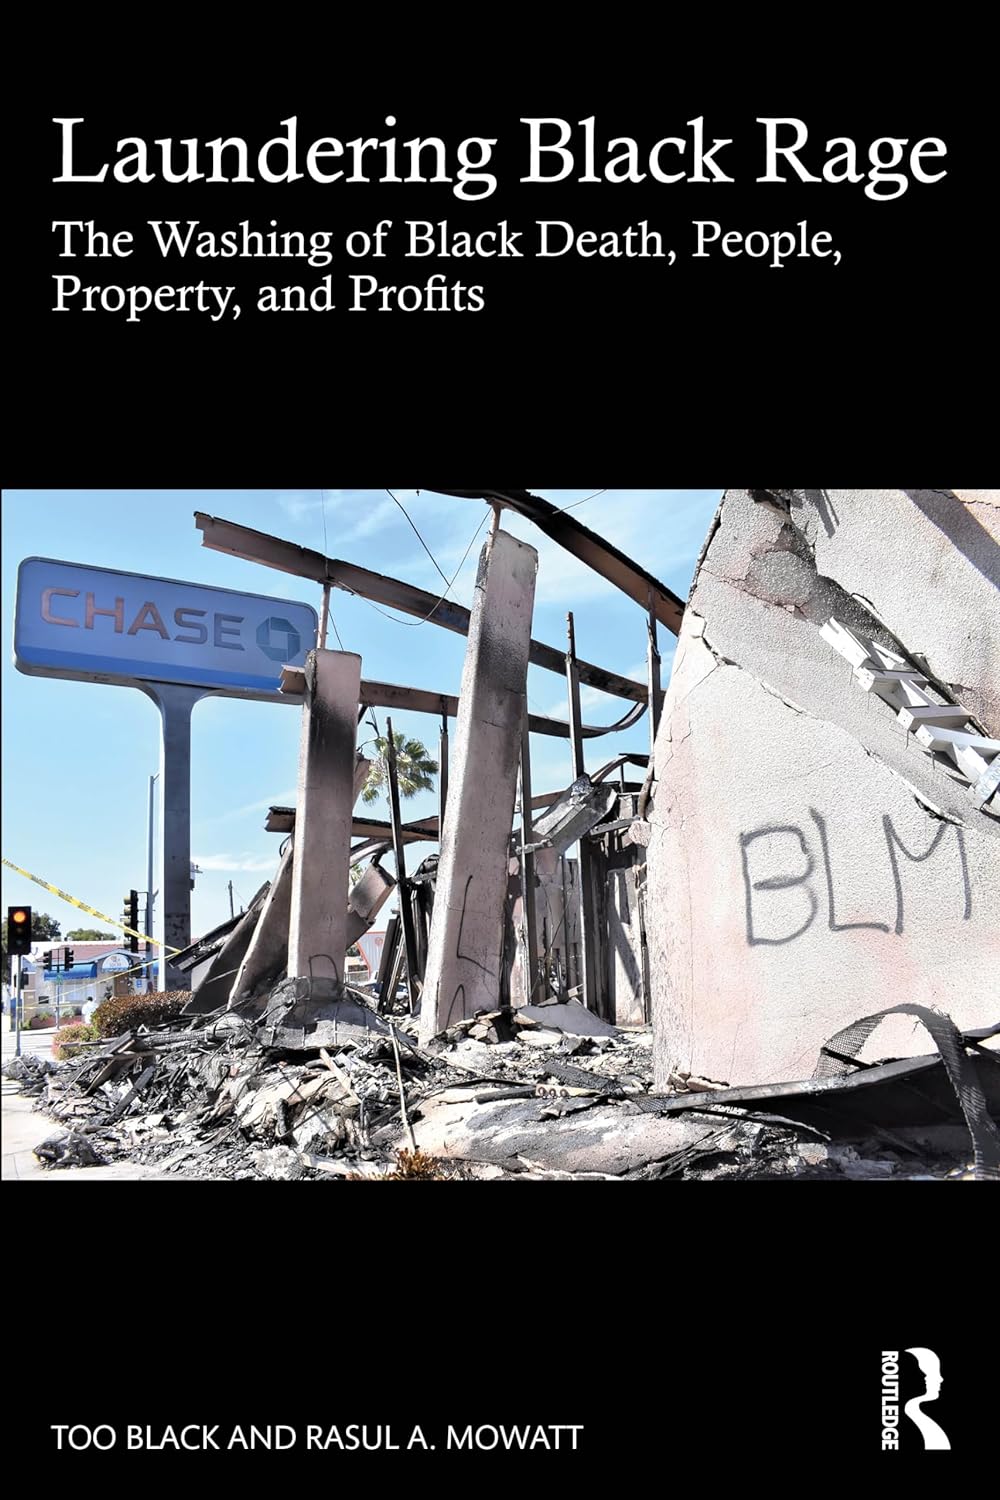 Laundering Black Rage // The Washing of Black Death, People, Property, and Profits